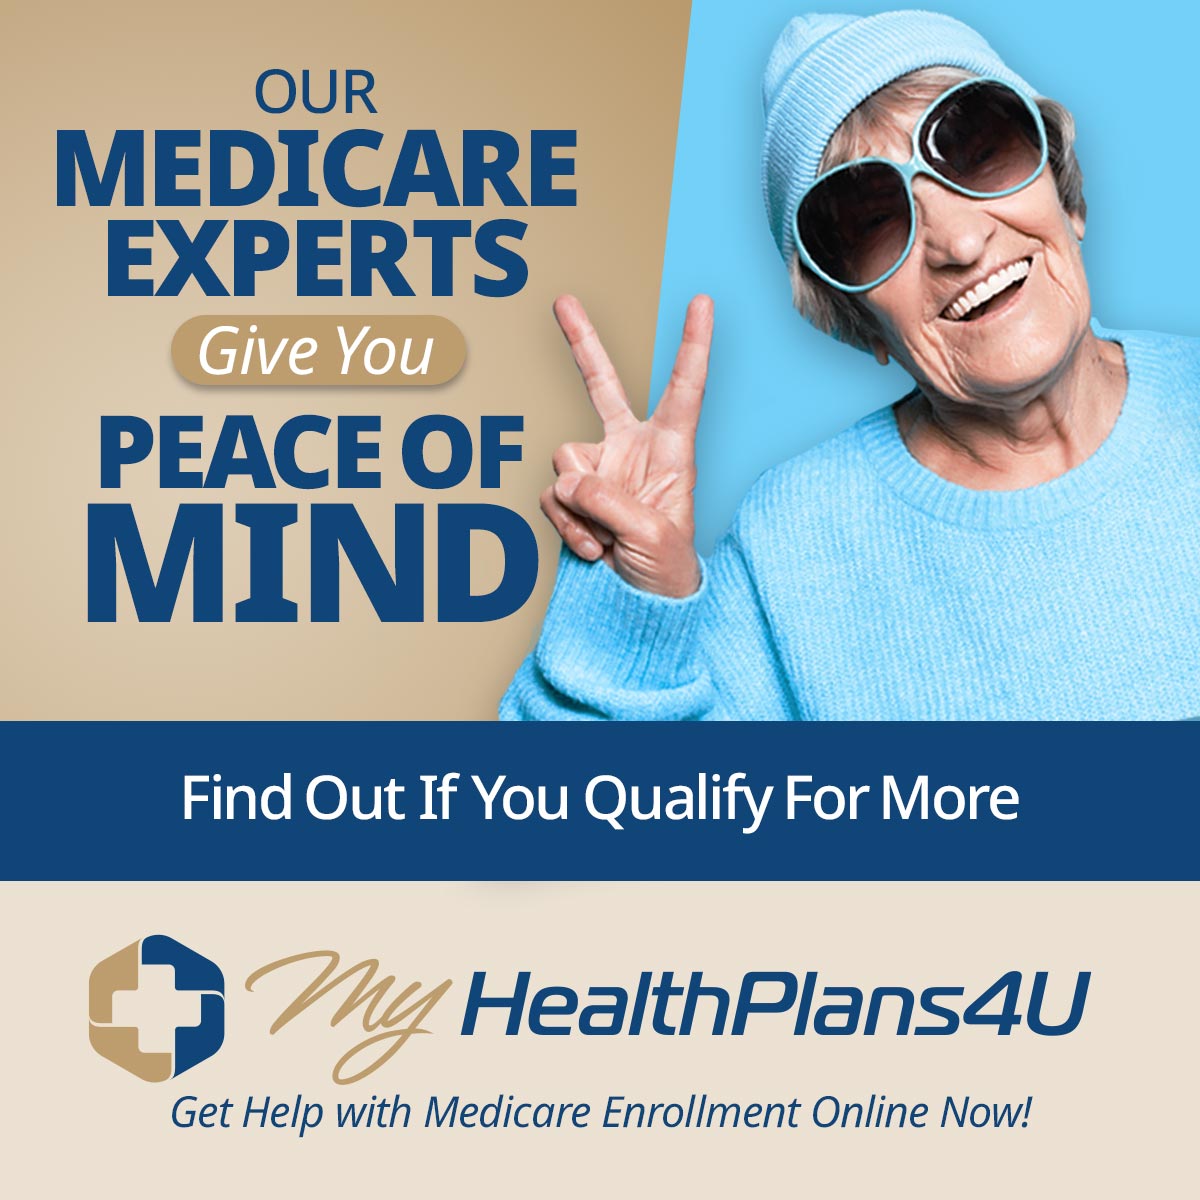 Our Medicare experts give you peace of mind. Find out if you qualify for more. My Health Plans 4 u. Get help with Medicare online now!